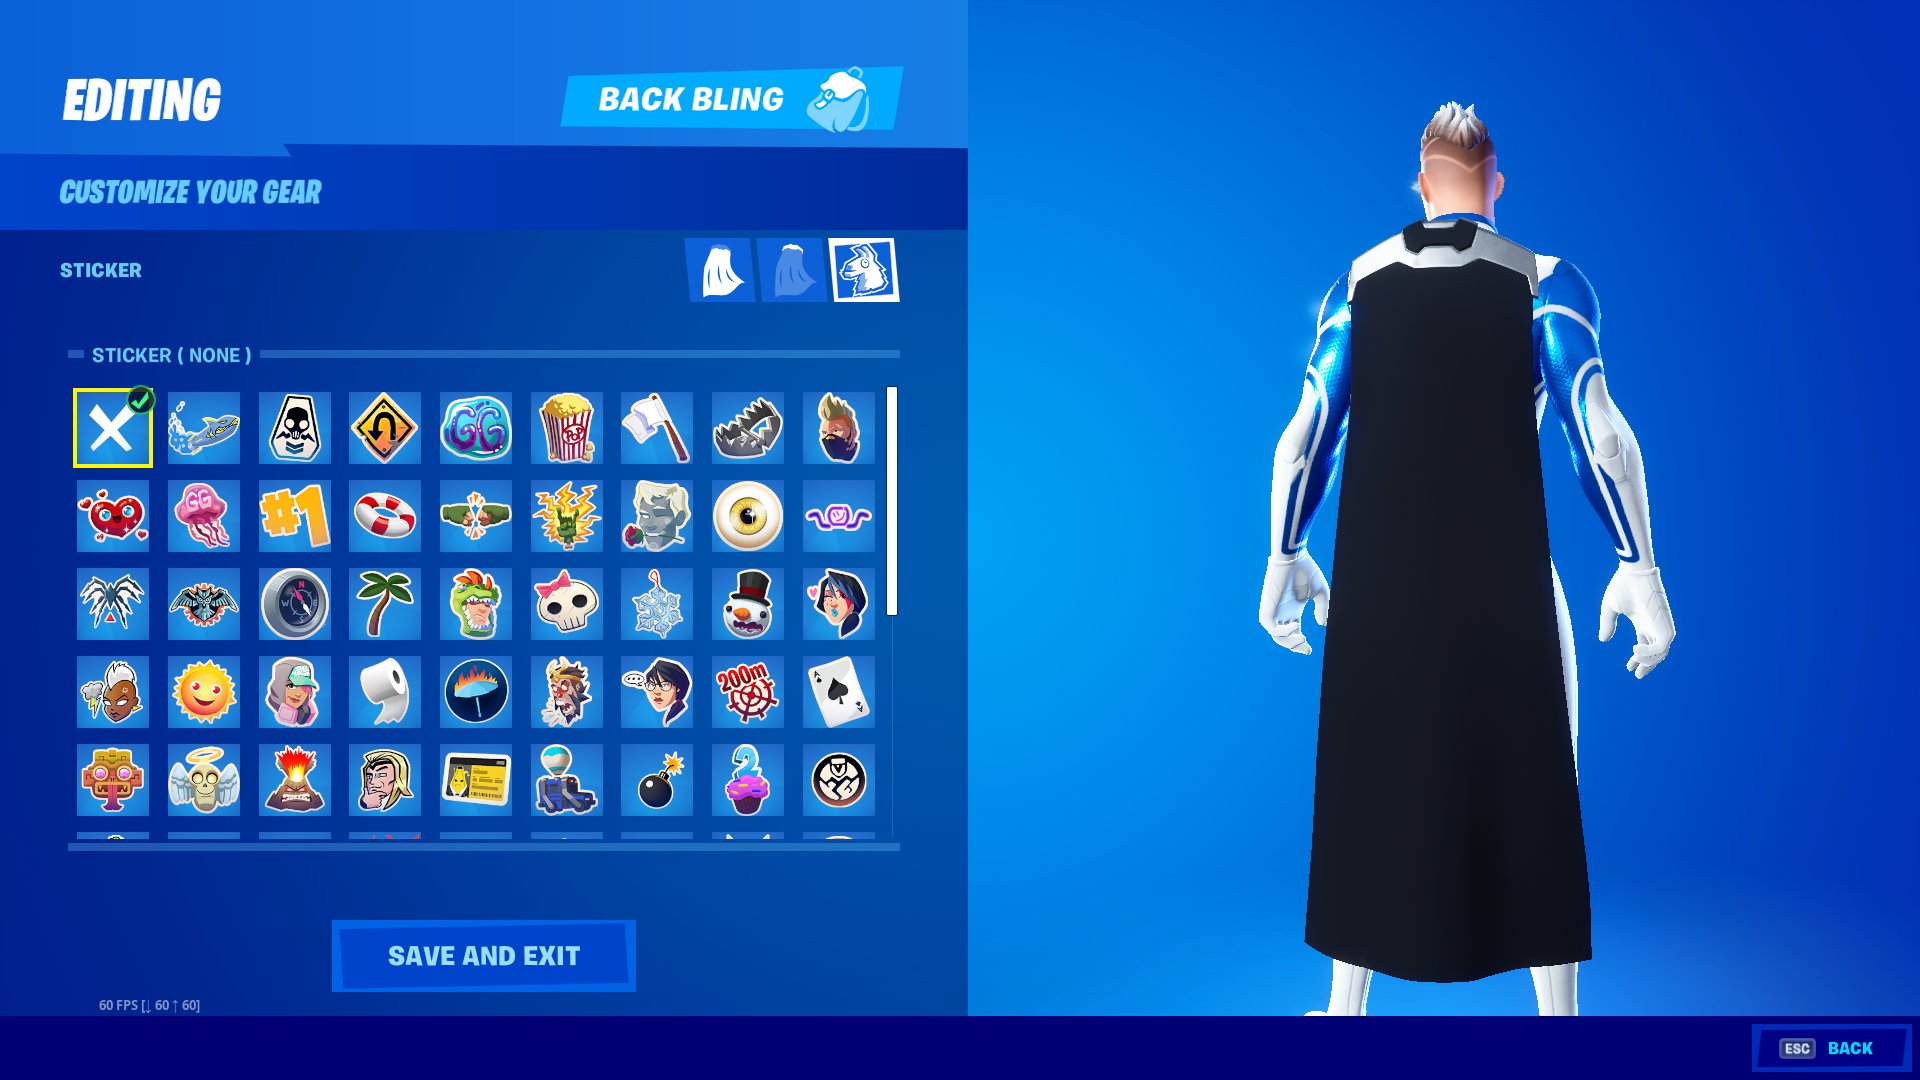 Matthew on Twitter: "We can remove the sticker from our hero skins and cape! #Fortnite / Twitter